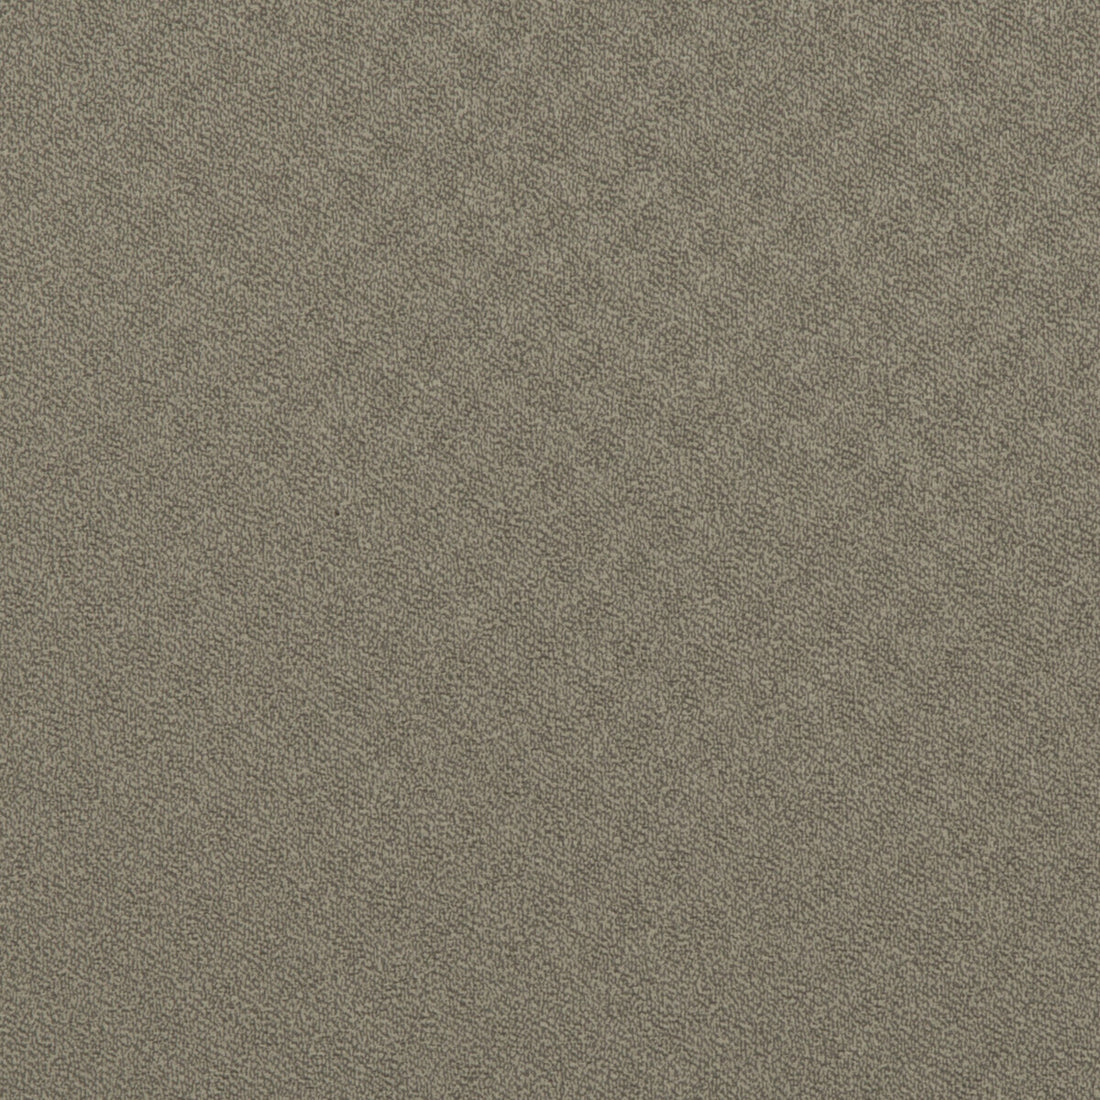 Invincible fabric in meteor color - pattern INVINCIBLE.21.0 - by Kravet Contract in the Faux Leather Extreme Performance collection